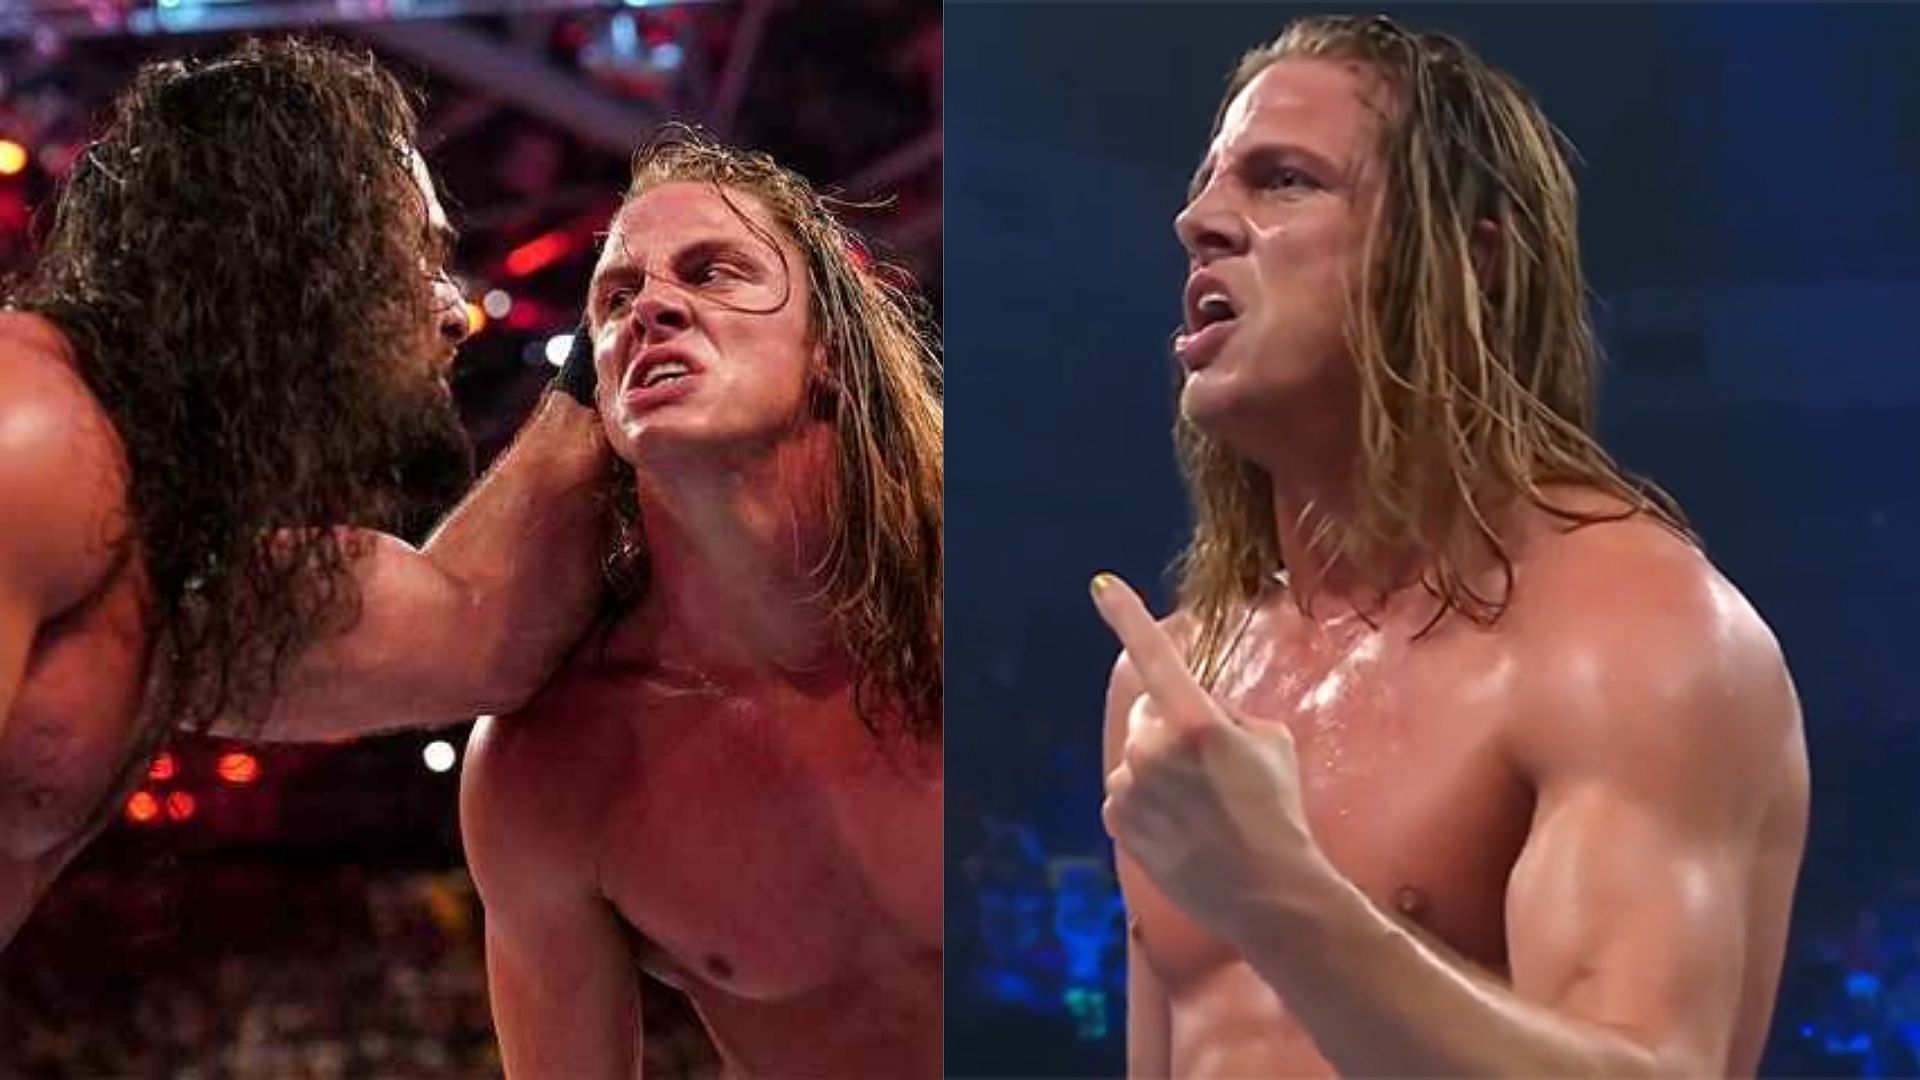 Riddle was embroiled in a personal feud with Seth Rollins this year.